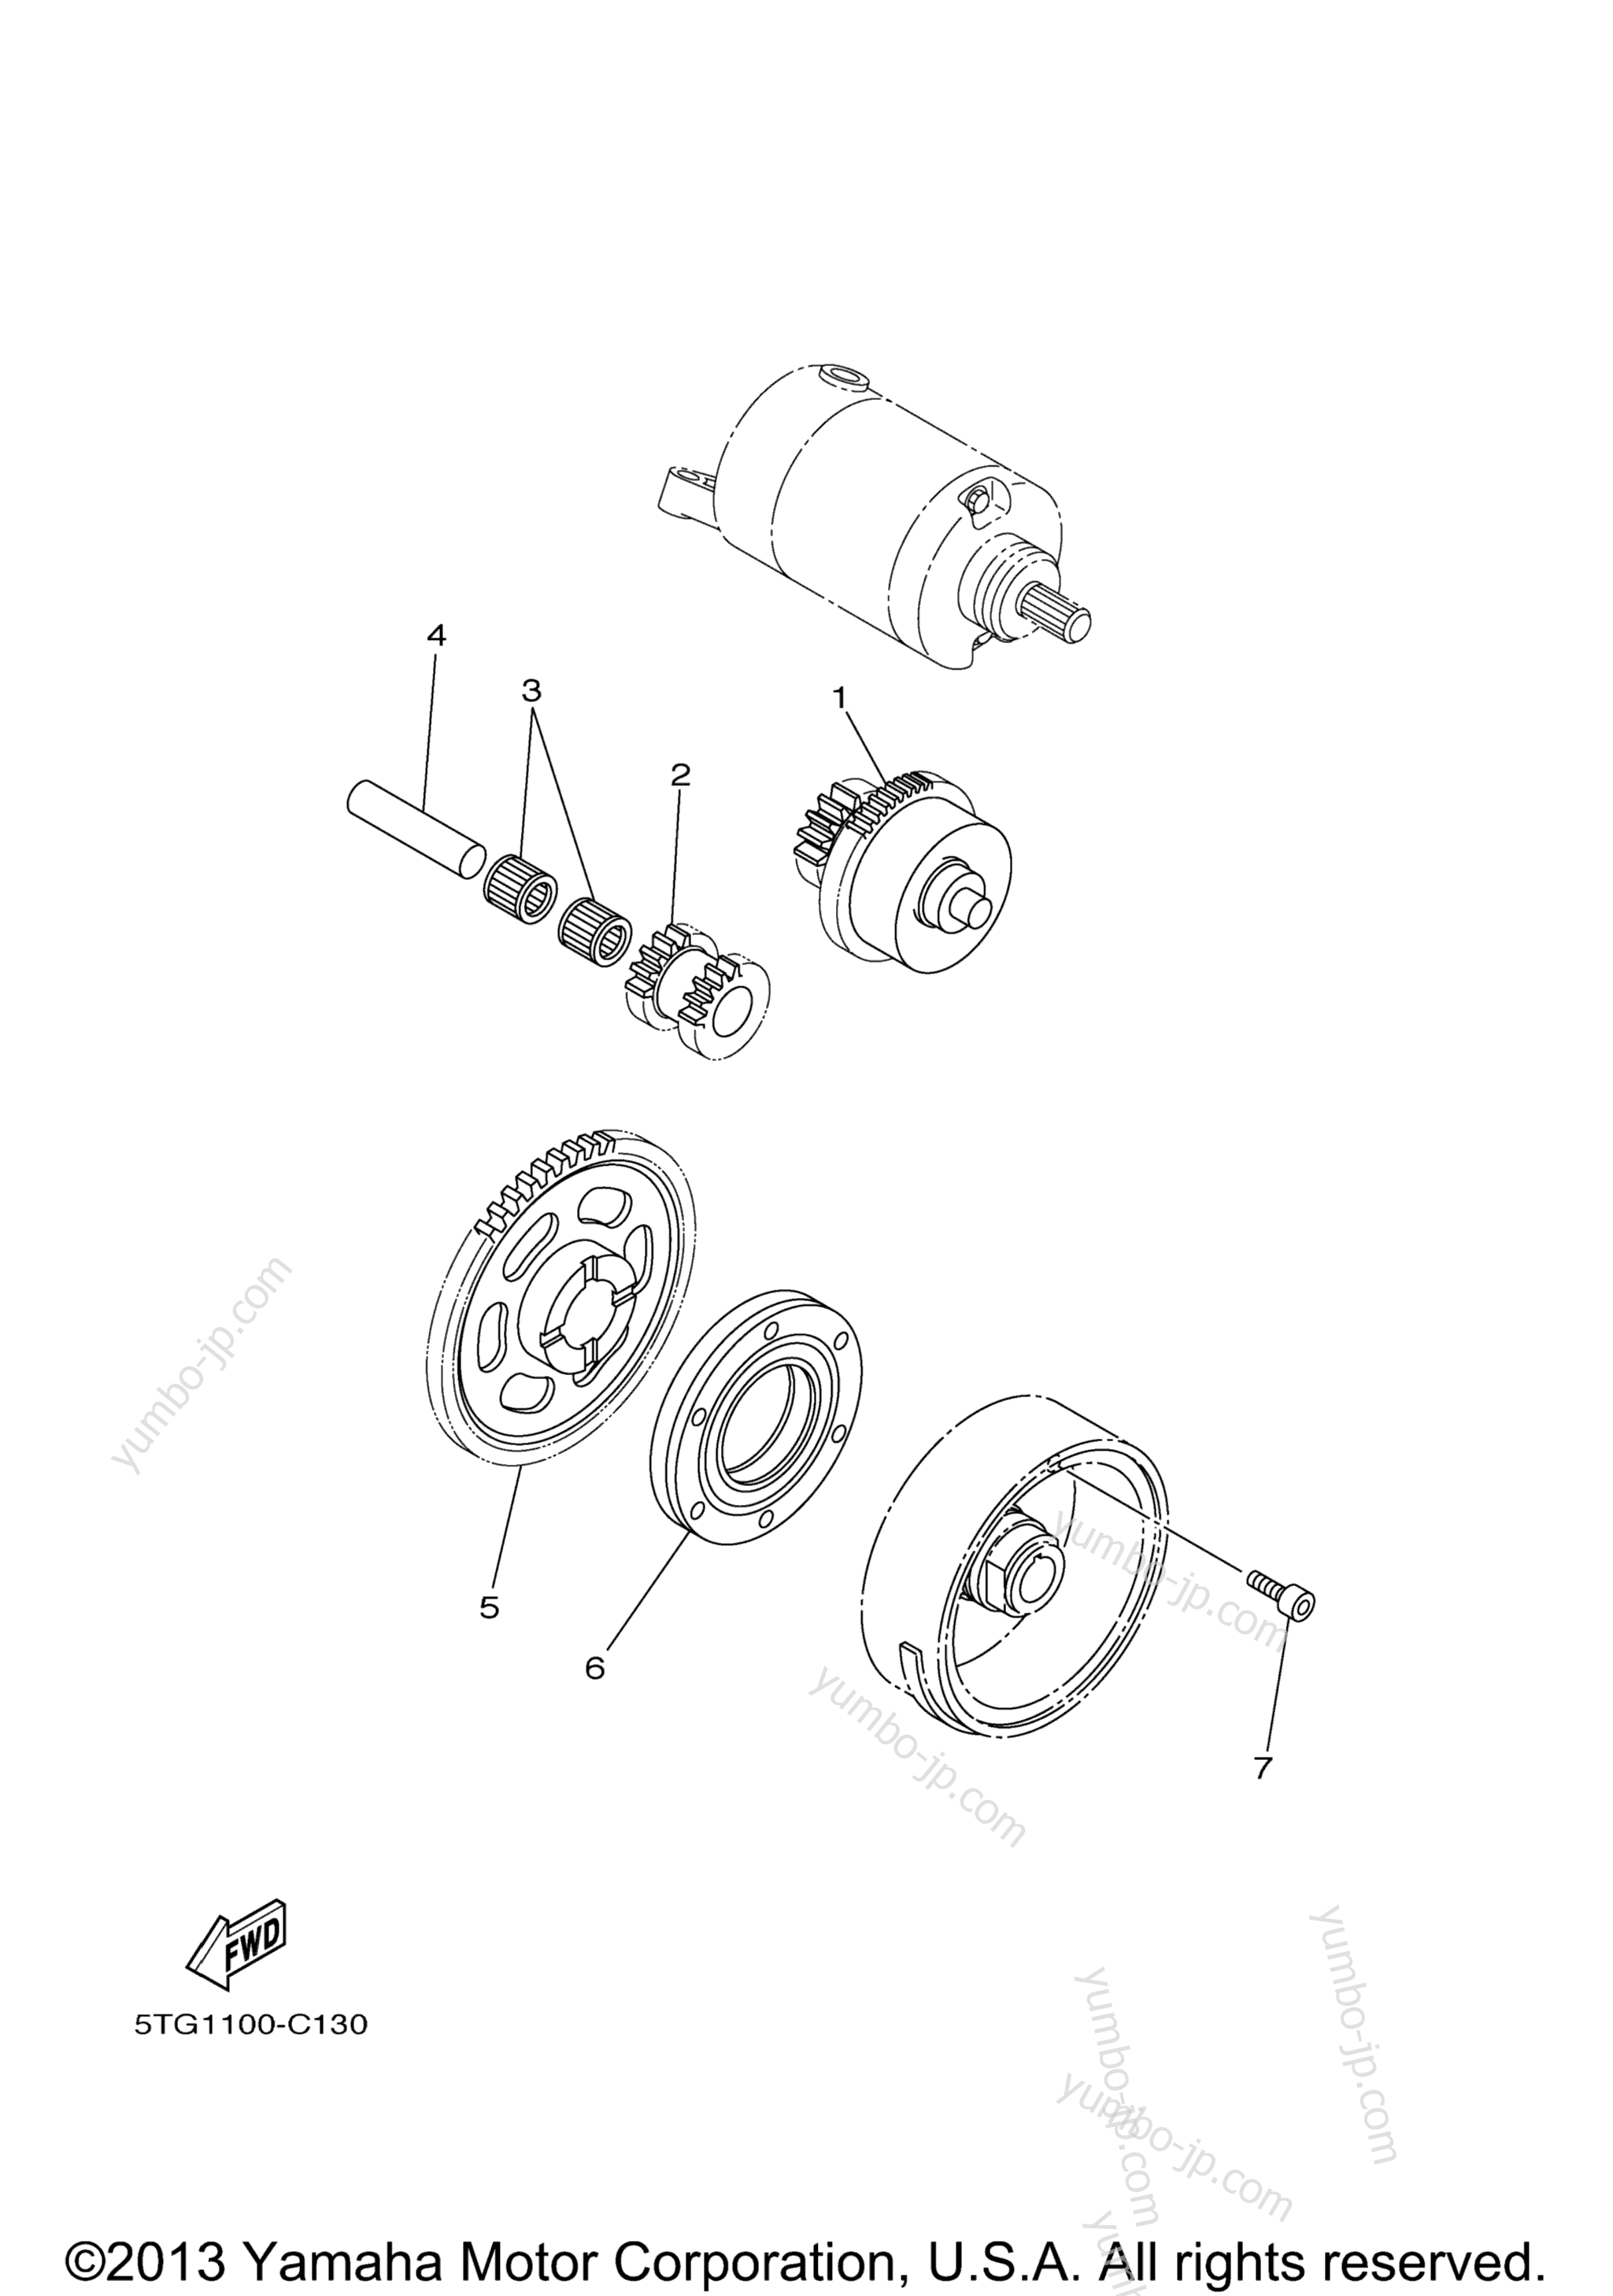 STARTER for ATVs YAMAHA YFZ450 SPECIAL EDITION (YFZ450SPX) 2008 year